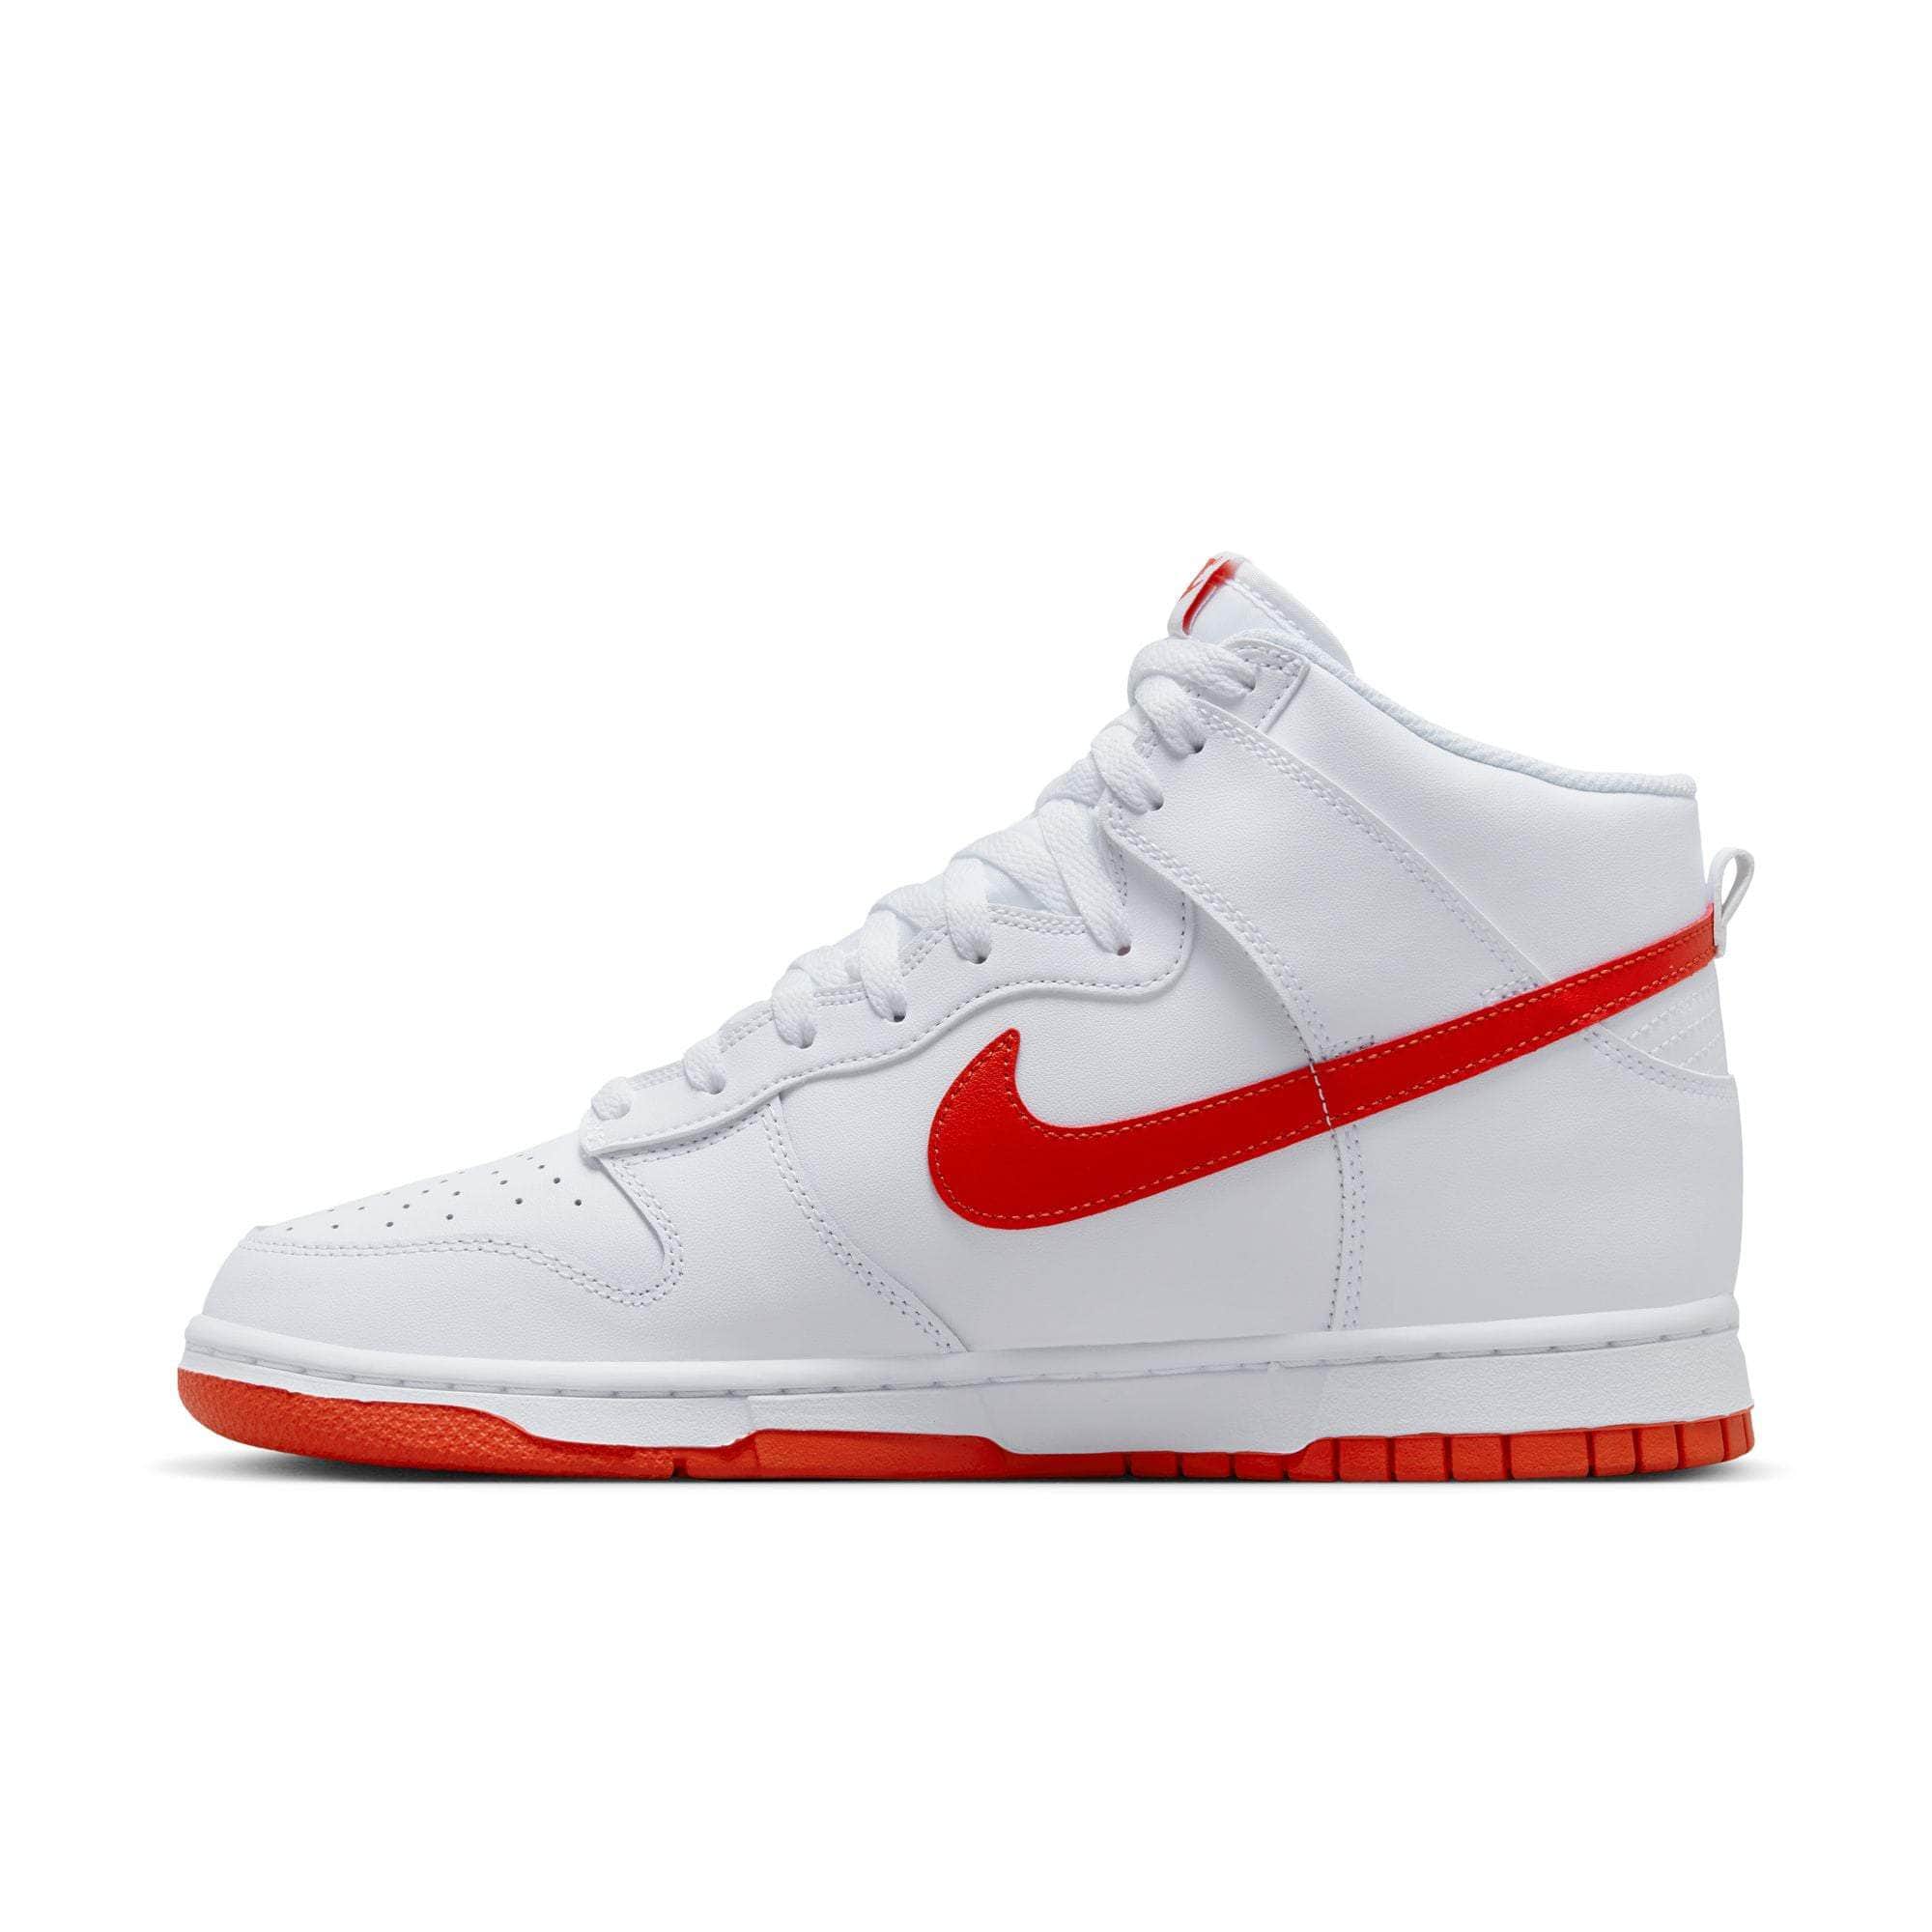 NIKE FOOTWEAR Nike Dunk High White "Picante Red" - Men's